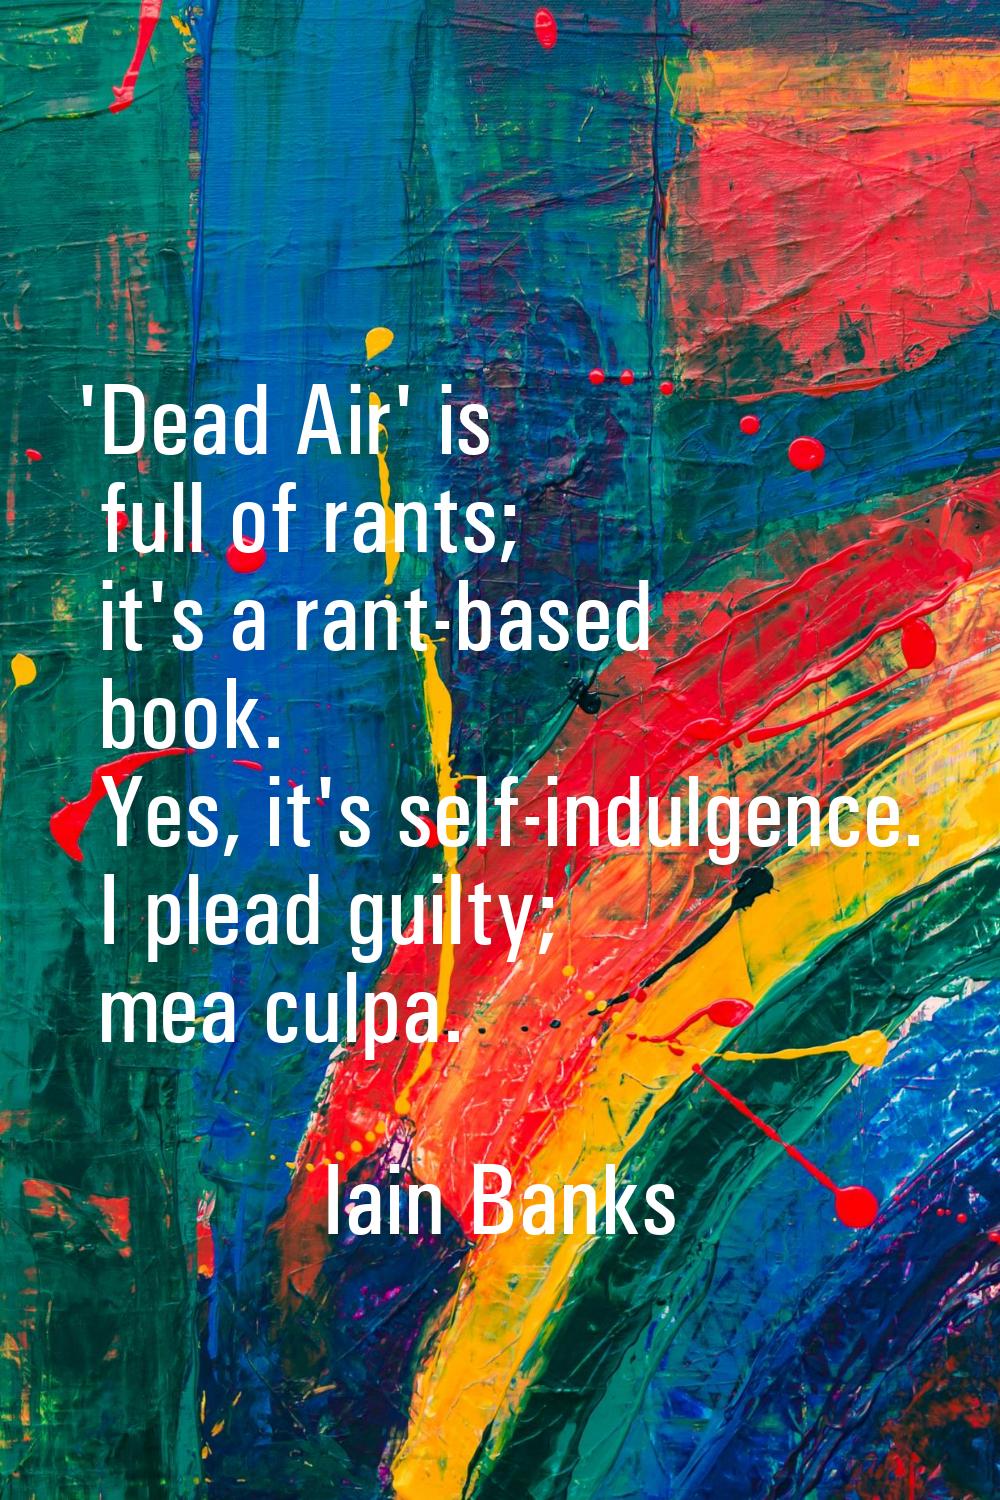 'Dead Air' is full of rants; it's a rant-based book. Yes, it's self-indulgence. I plead guilty; mea